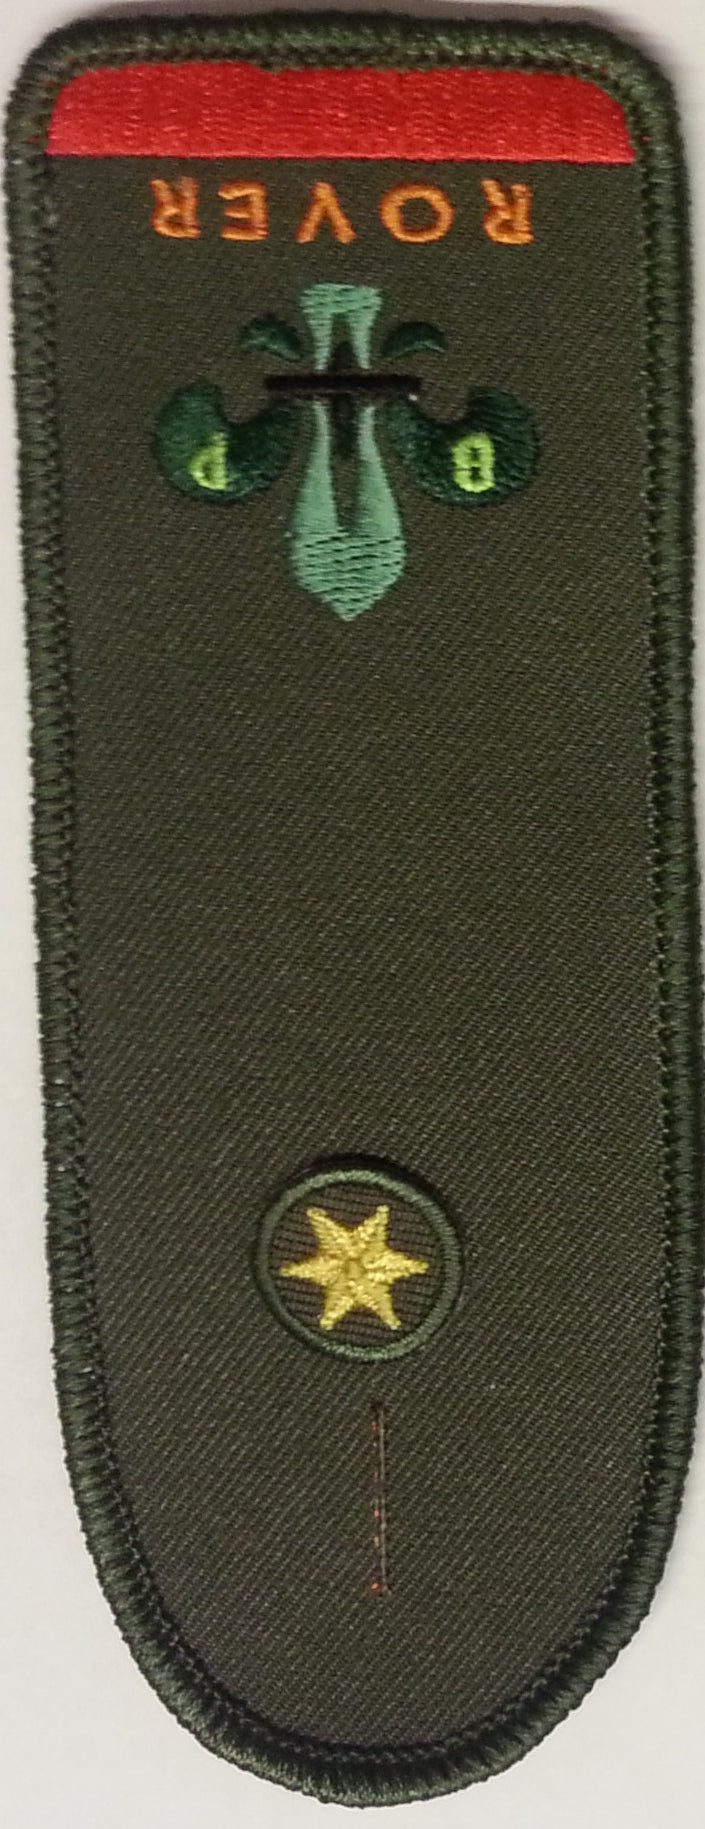 Trained Rover Knight Shoulder Board